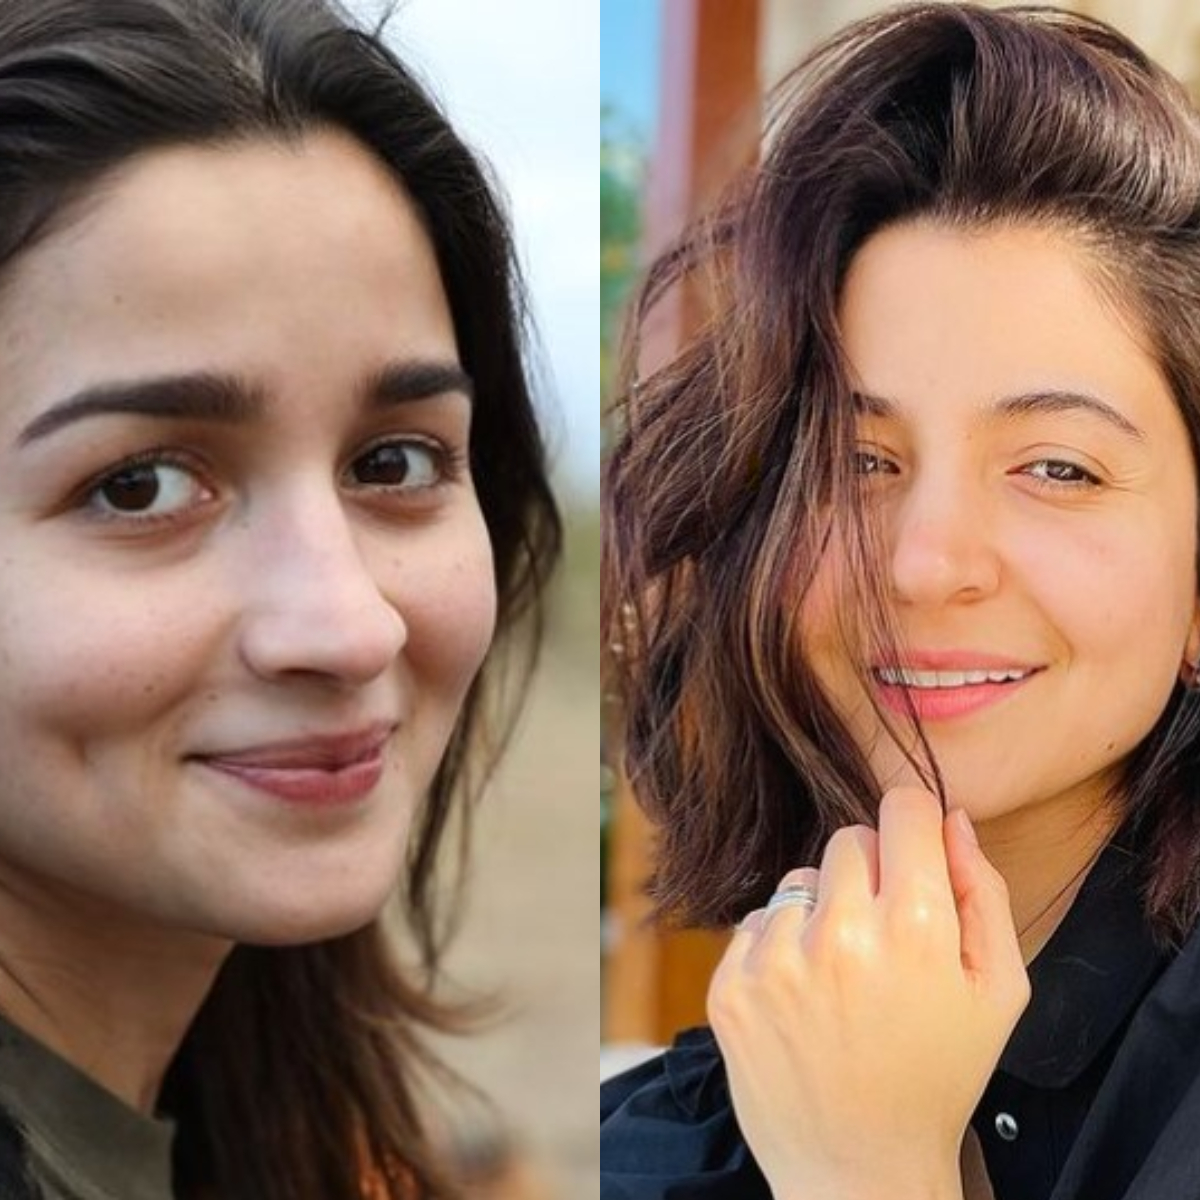 Neelam Indian Film Actress Nude Niple - 15 PICS of Bollywood actresses without makeup: Alia Bhatt to Anushka Sharma  who changed definition of beauty | PINKVILLA